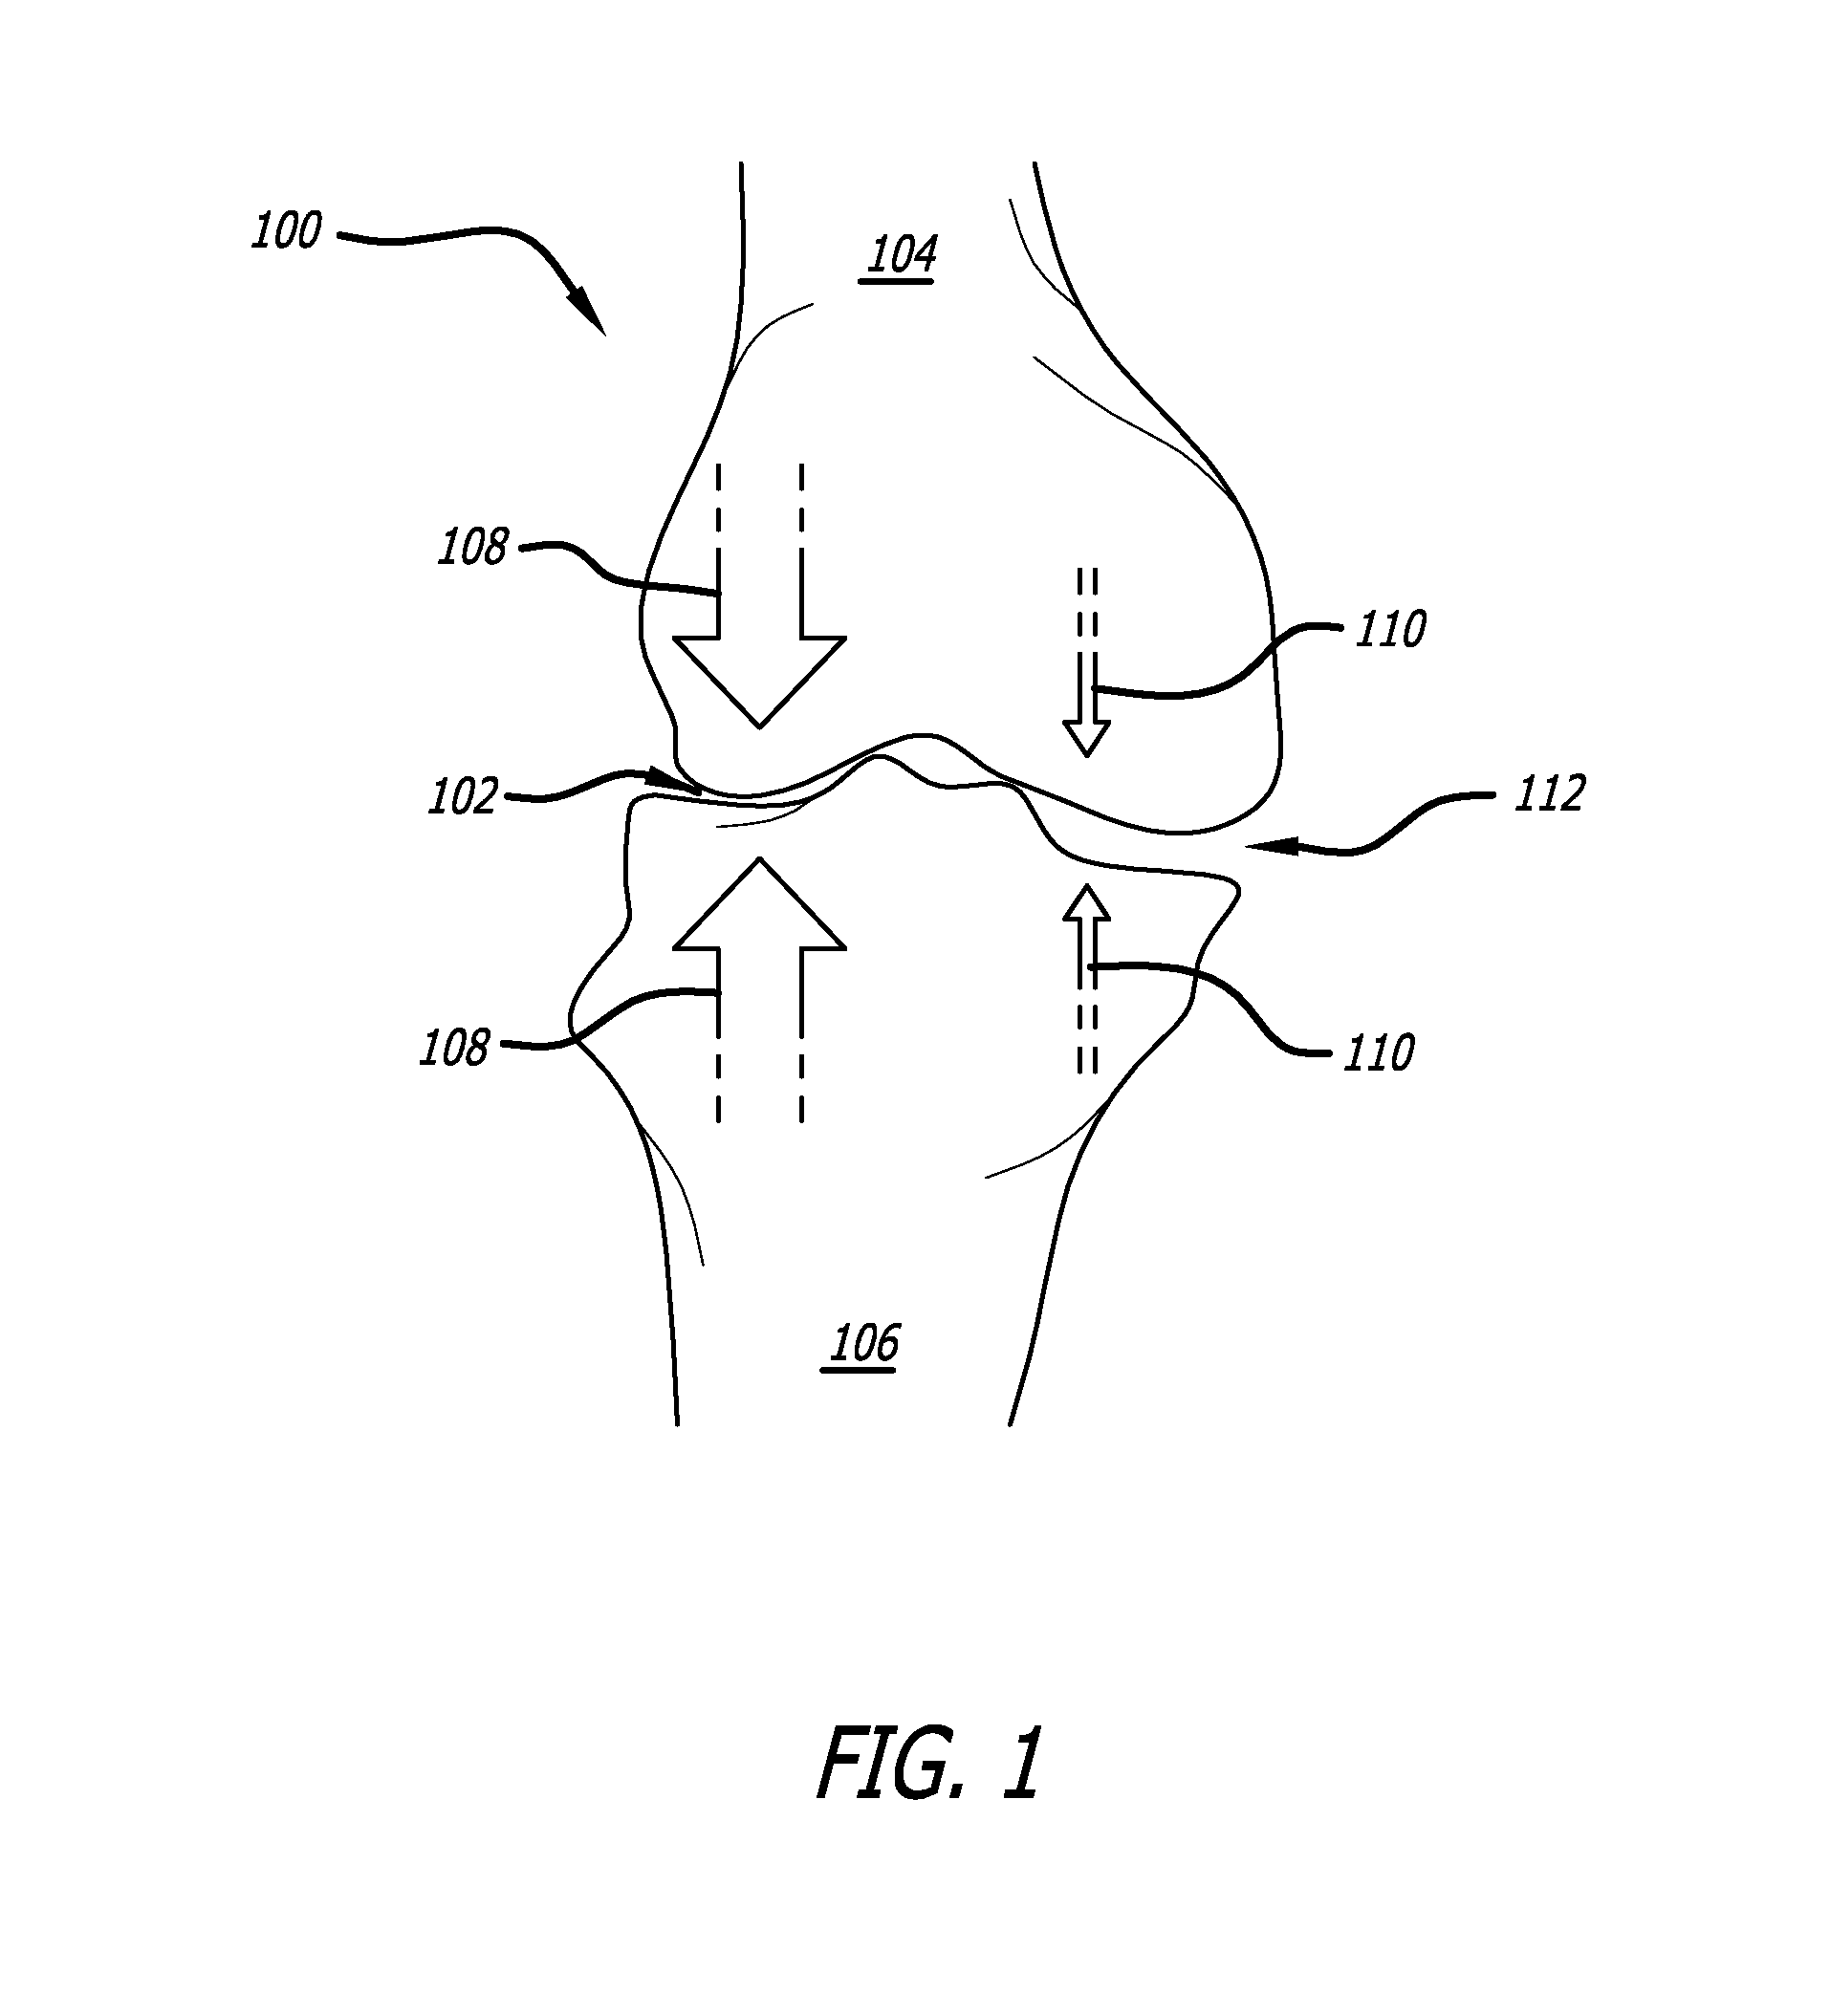 Load Transferring Systems and Methods for Transferring Load in a Joint